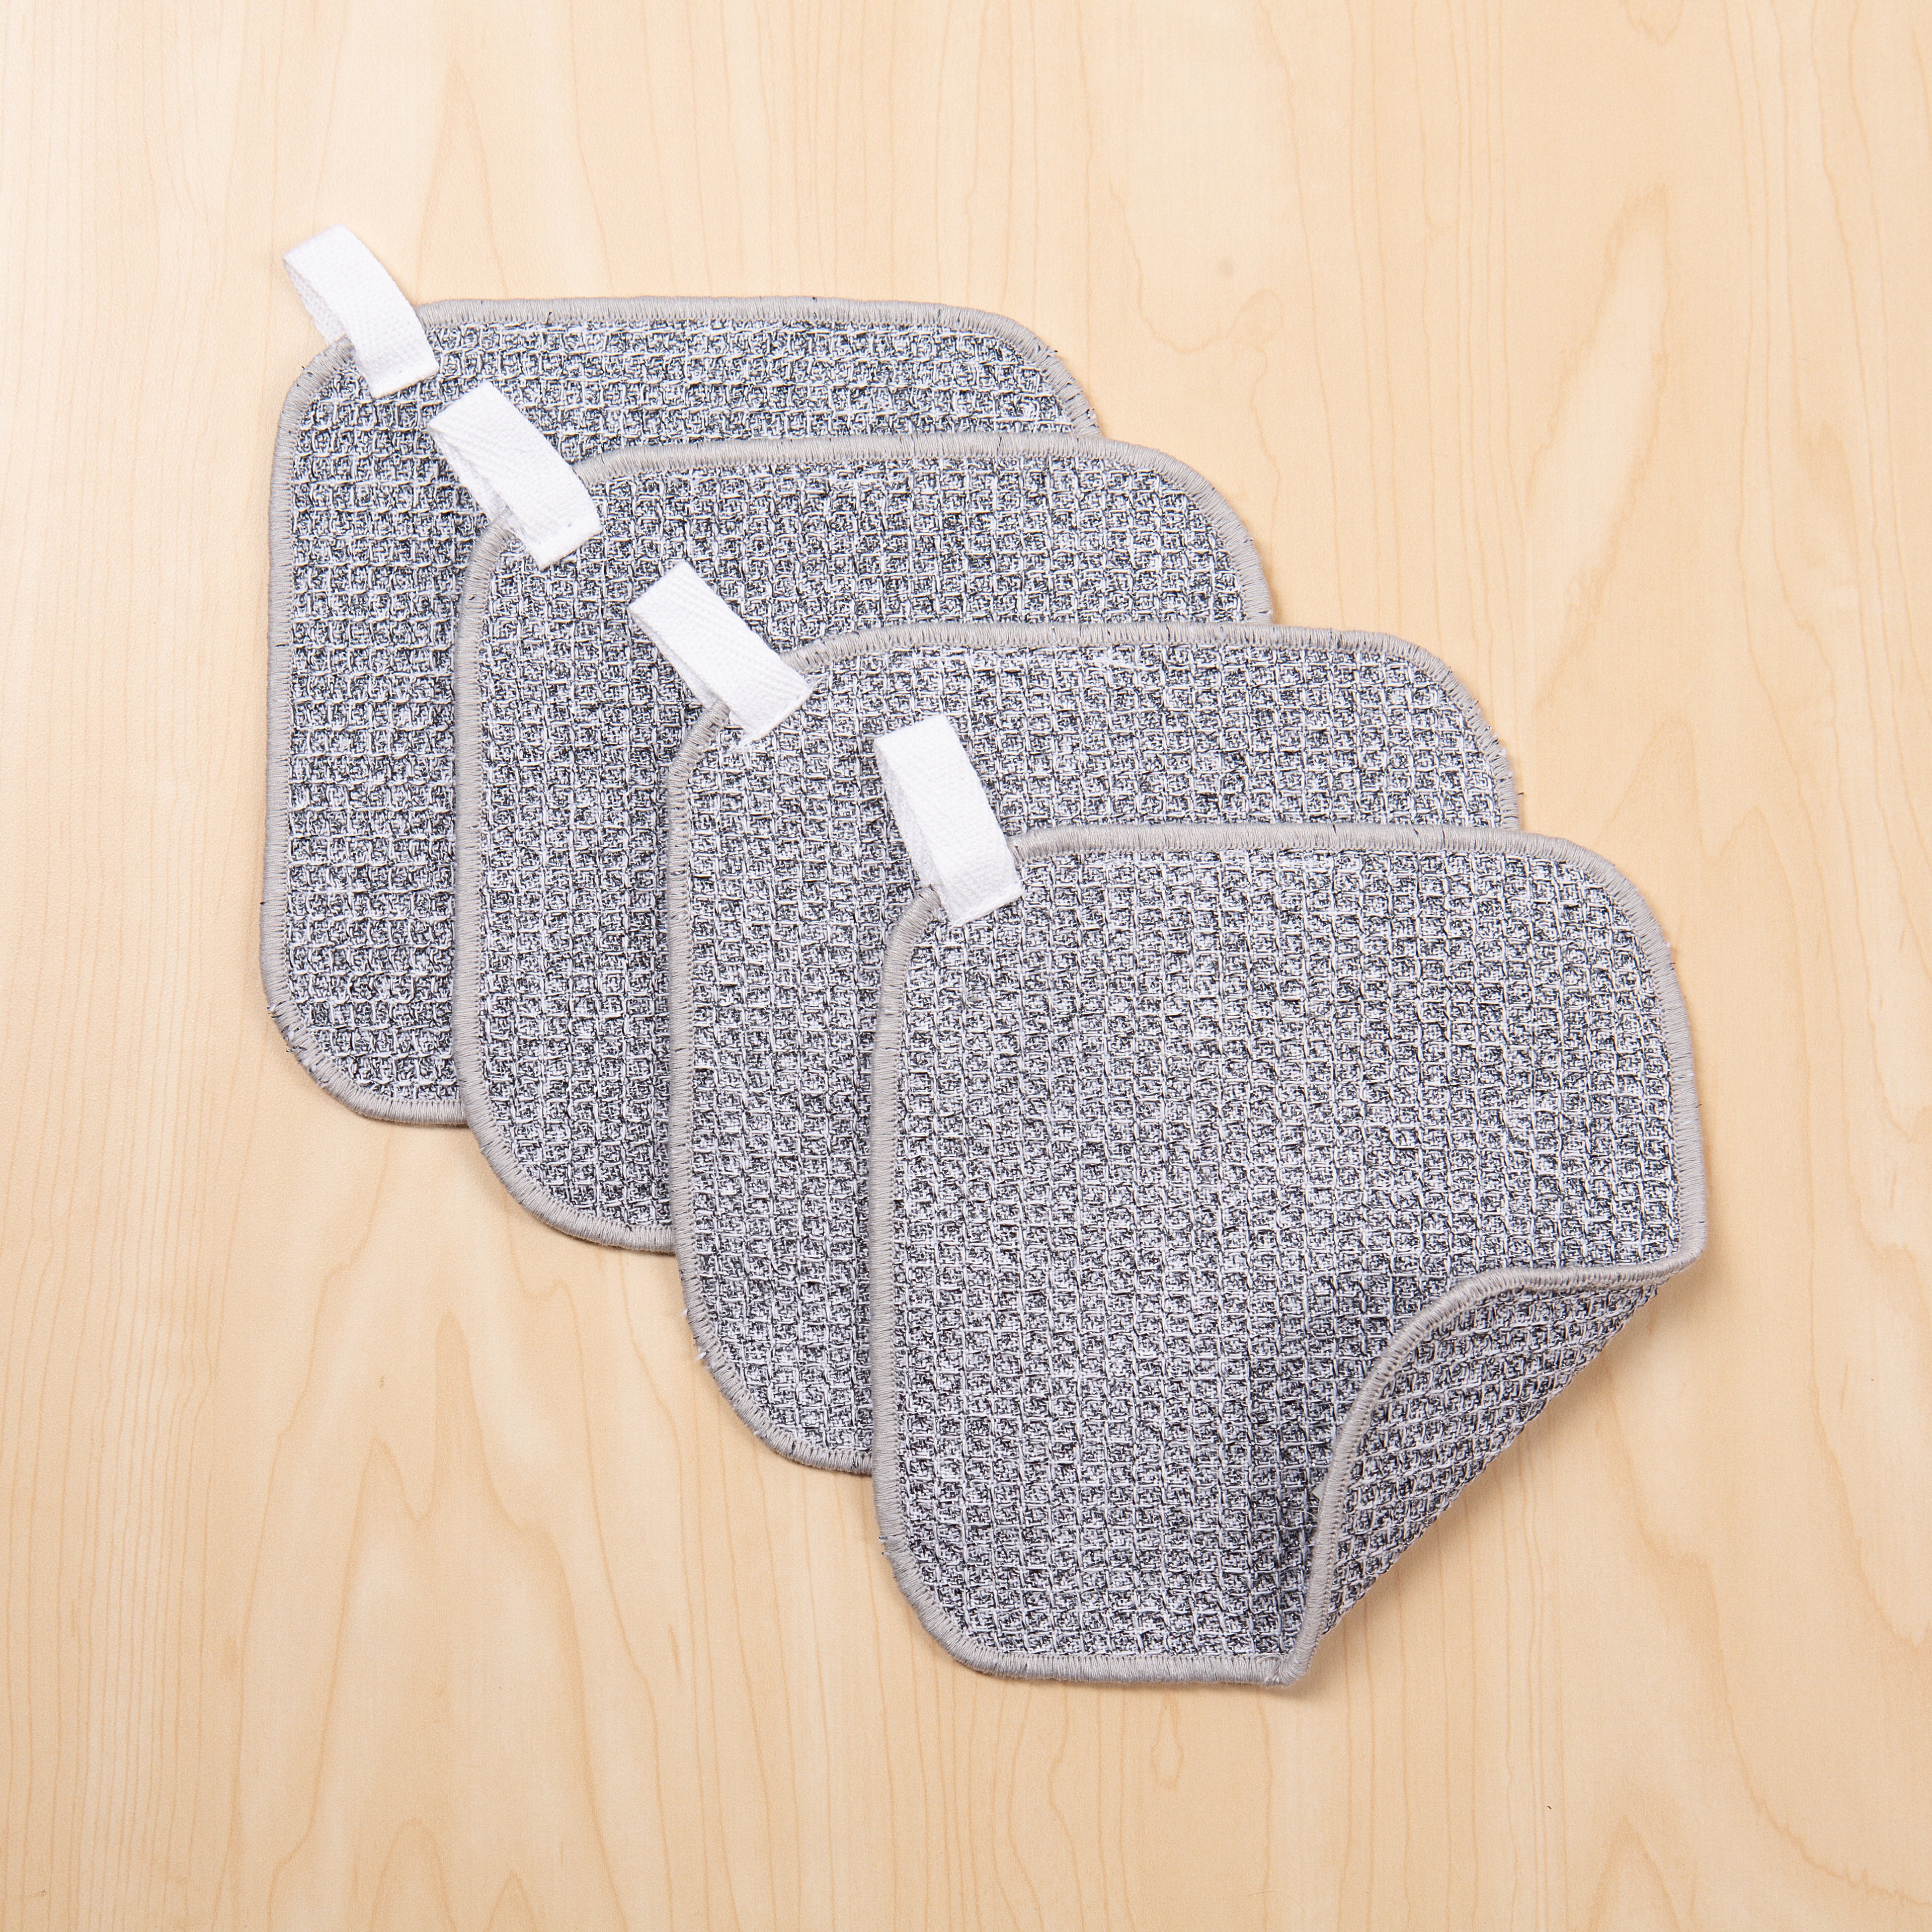 Mainstays Dish Scrubber, 4 Pack, 6 in x 6 in, Gray 